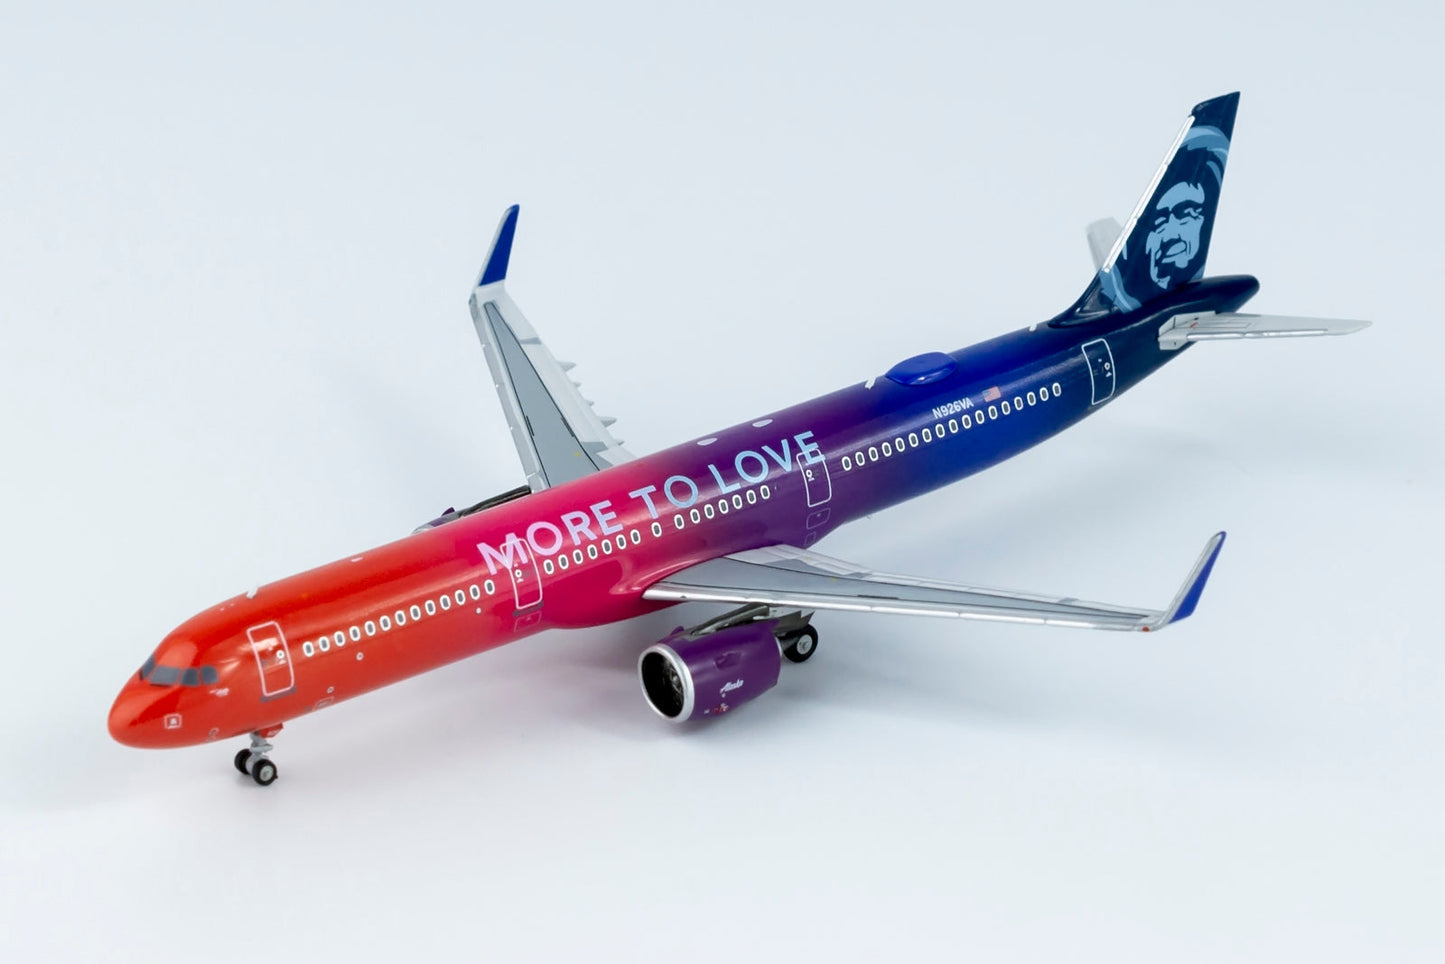 1/400 Alaska Airlines A321neo "More to Love" NG Models 13036s/d1 *Defective model*